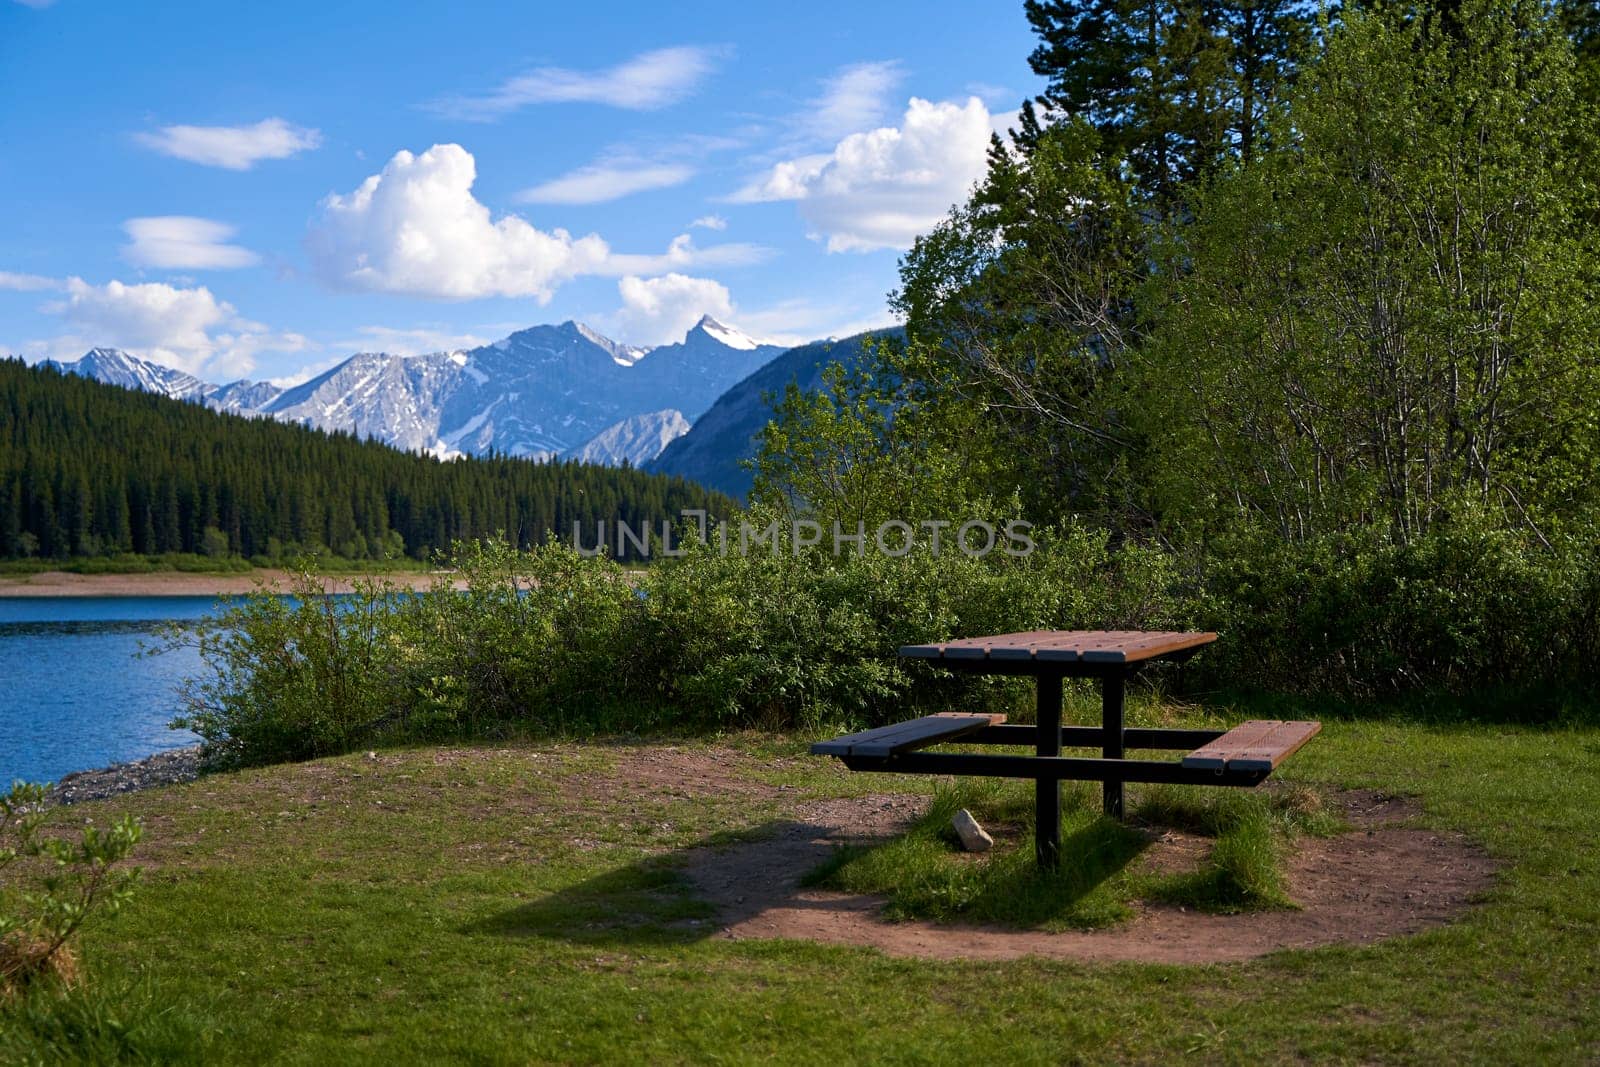 A picnic table on the edge of a lake overlooking the Canadian mountains in Alberta. by Try_my_best